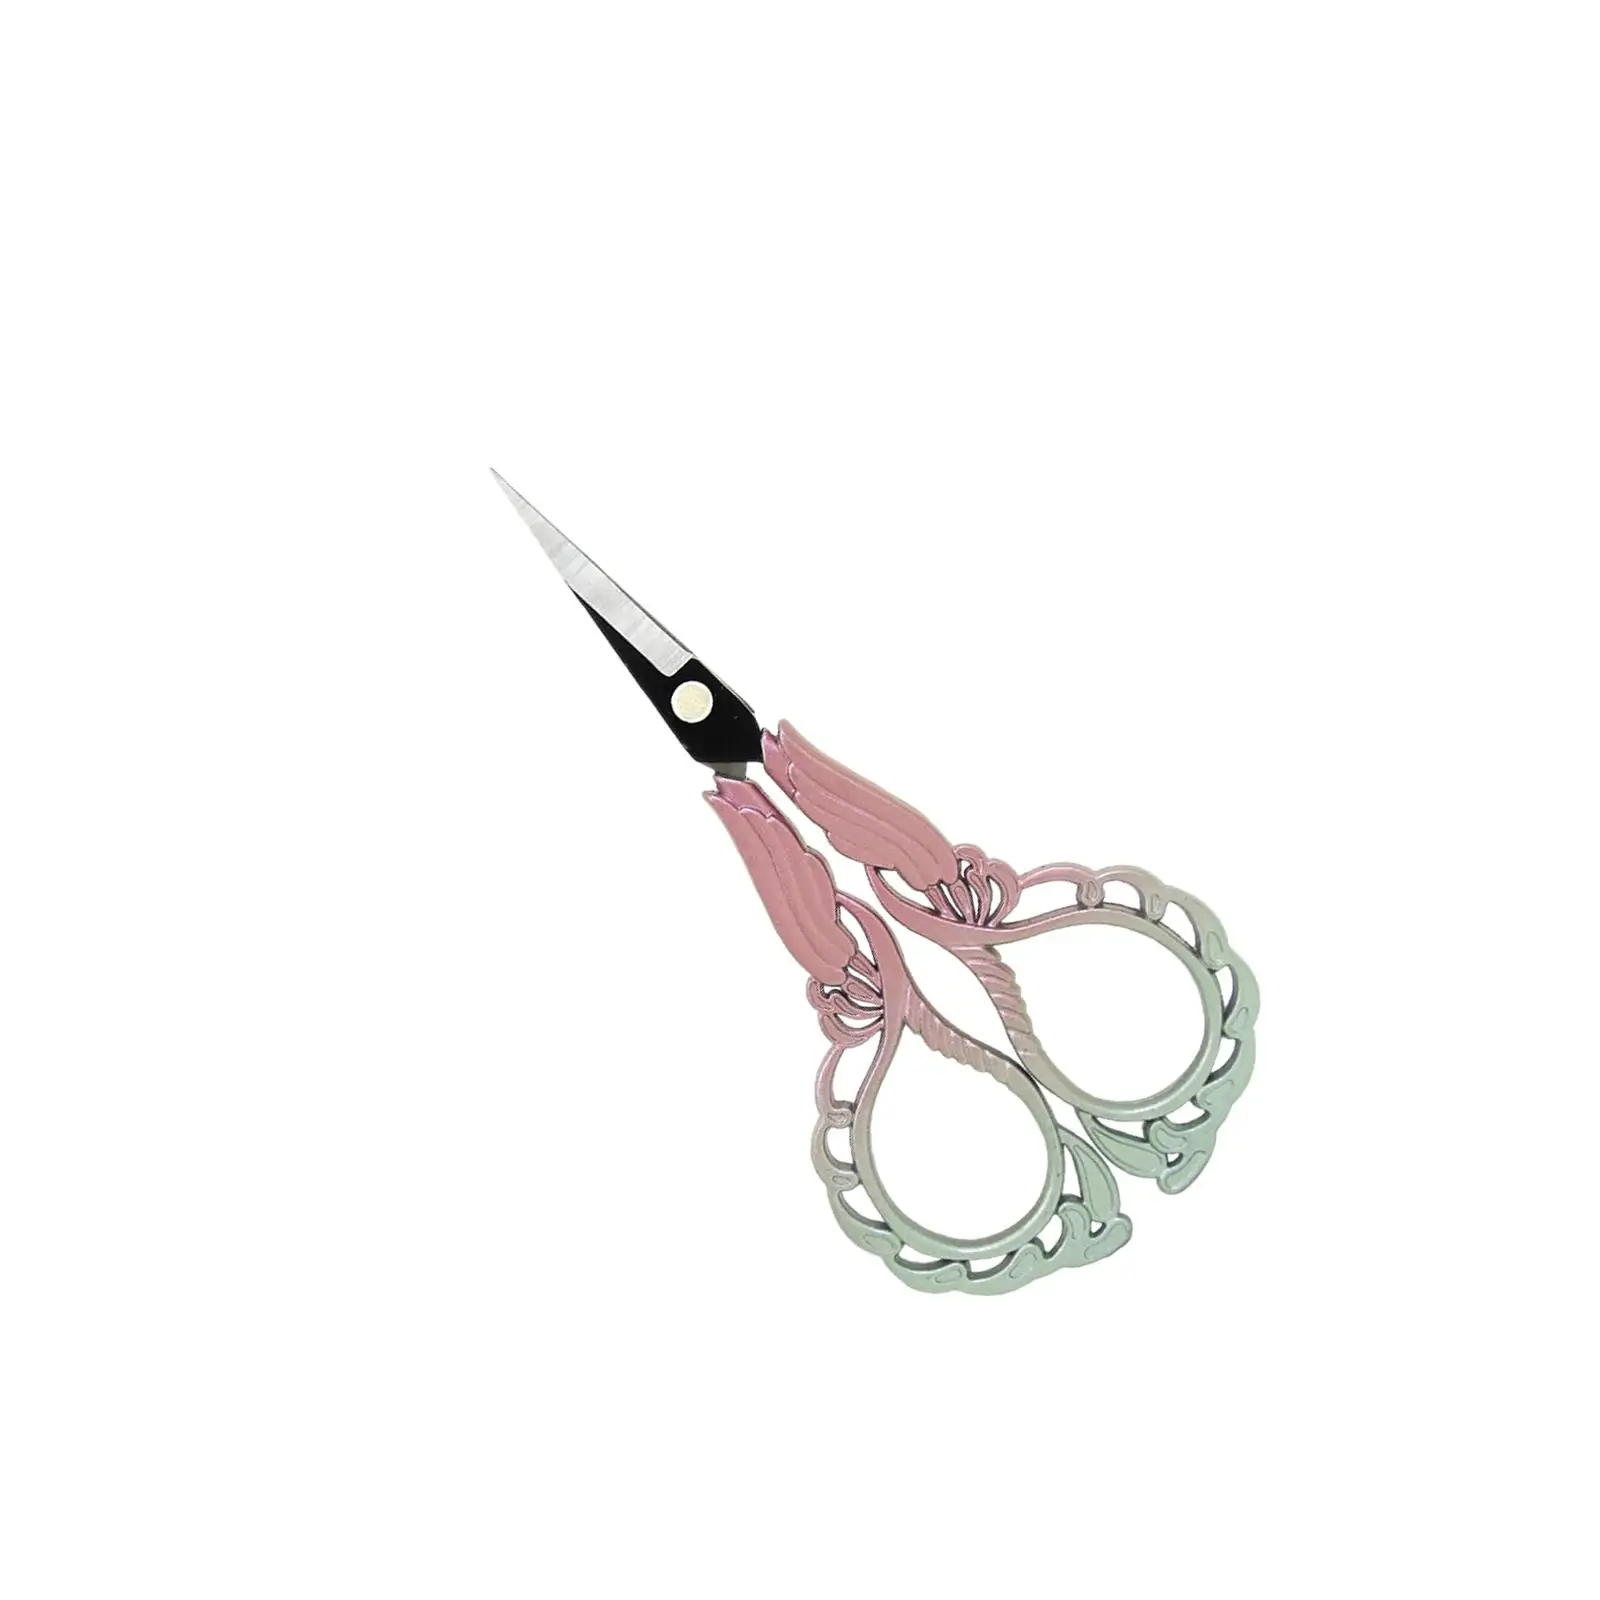 Embroidery Scissors Retro Style Cutting Tool Sewing for Household Sewing Craft